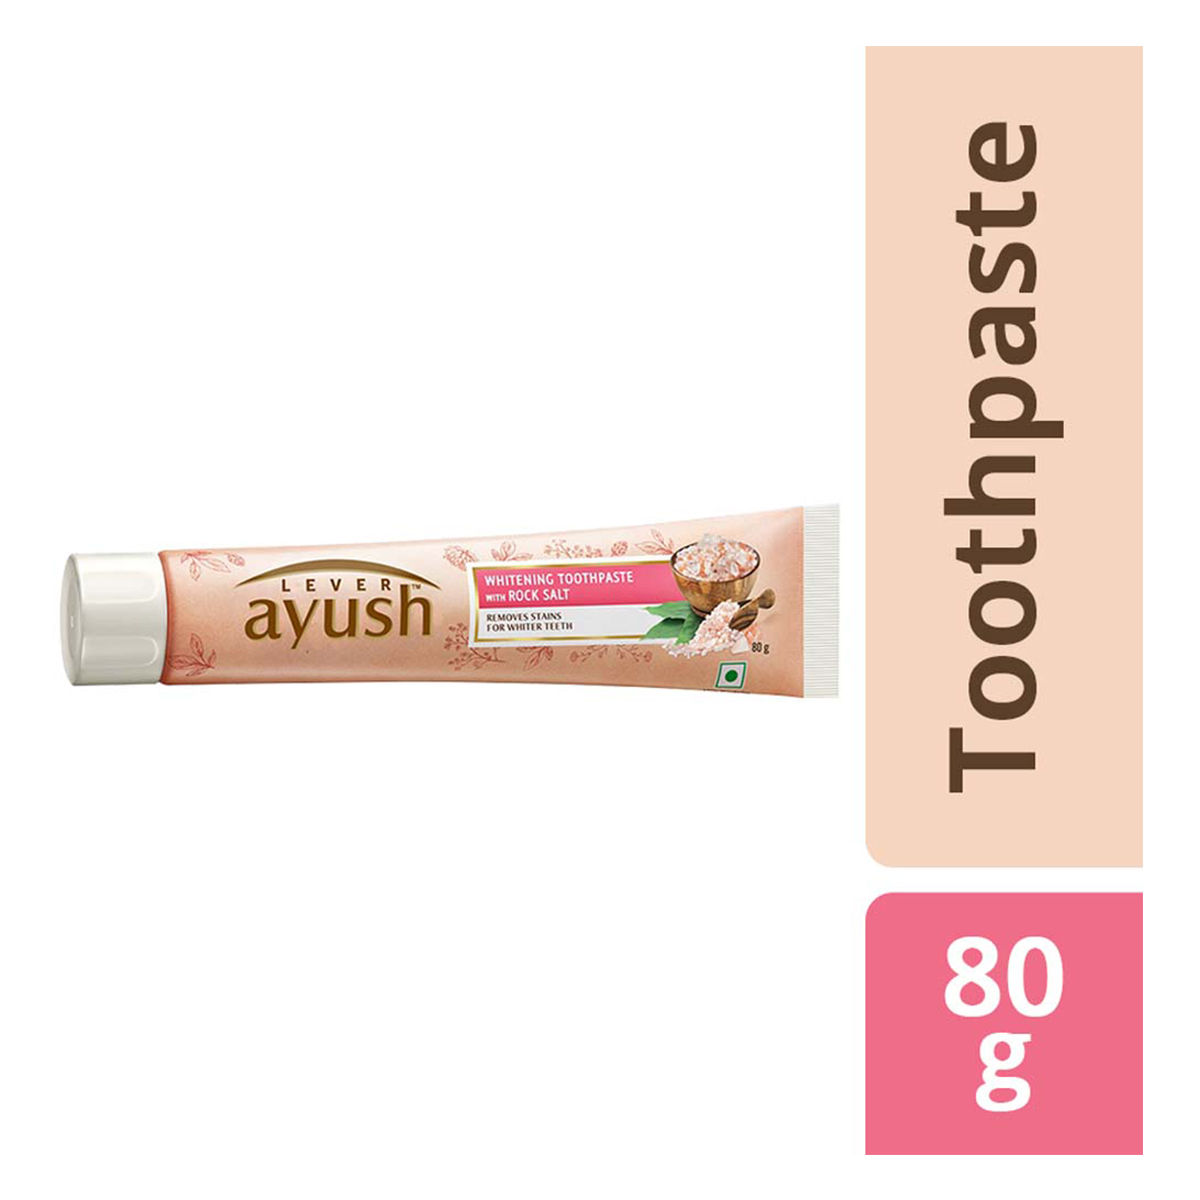 Buy Lever Ayush Whitening Toothpaste with Rock Salt, 80 gm Online